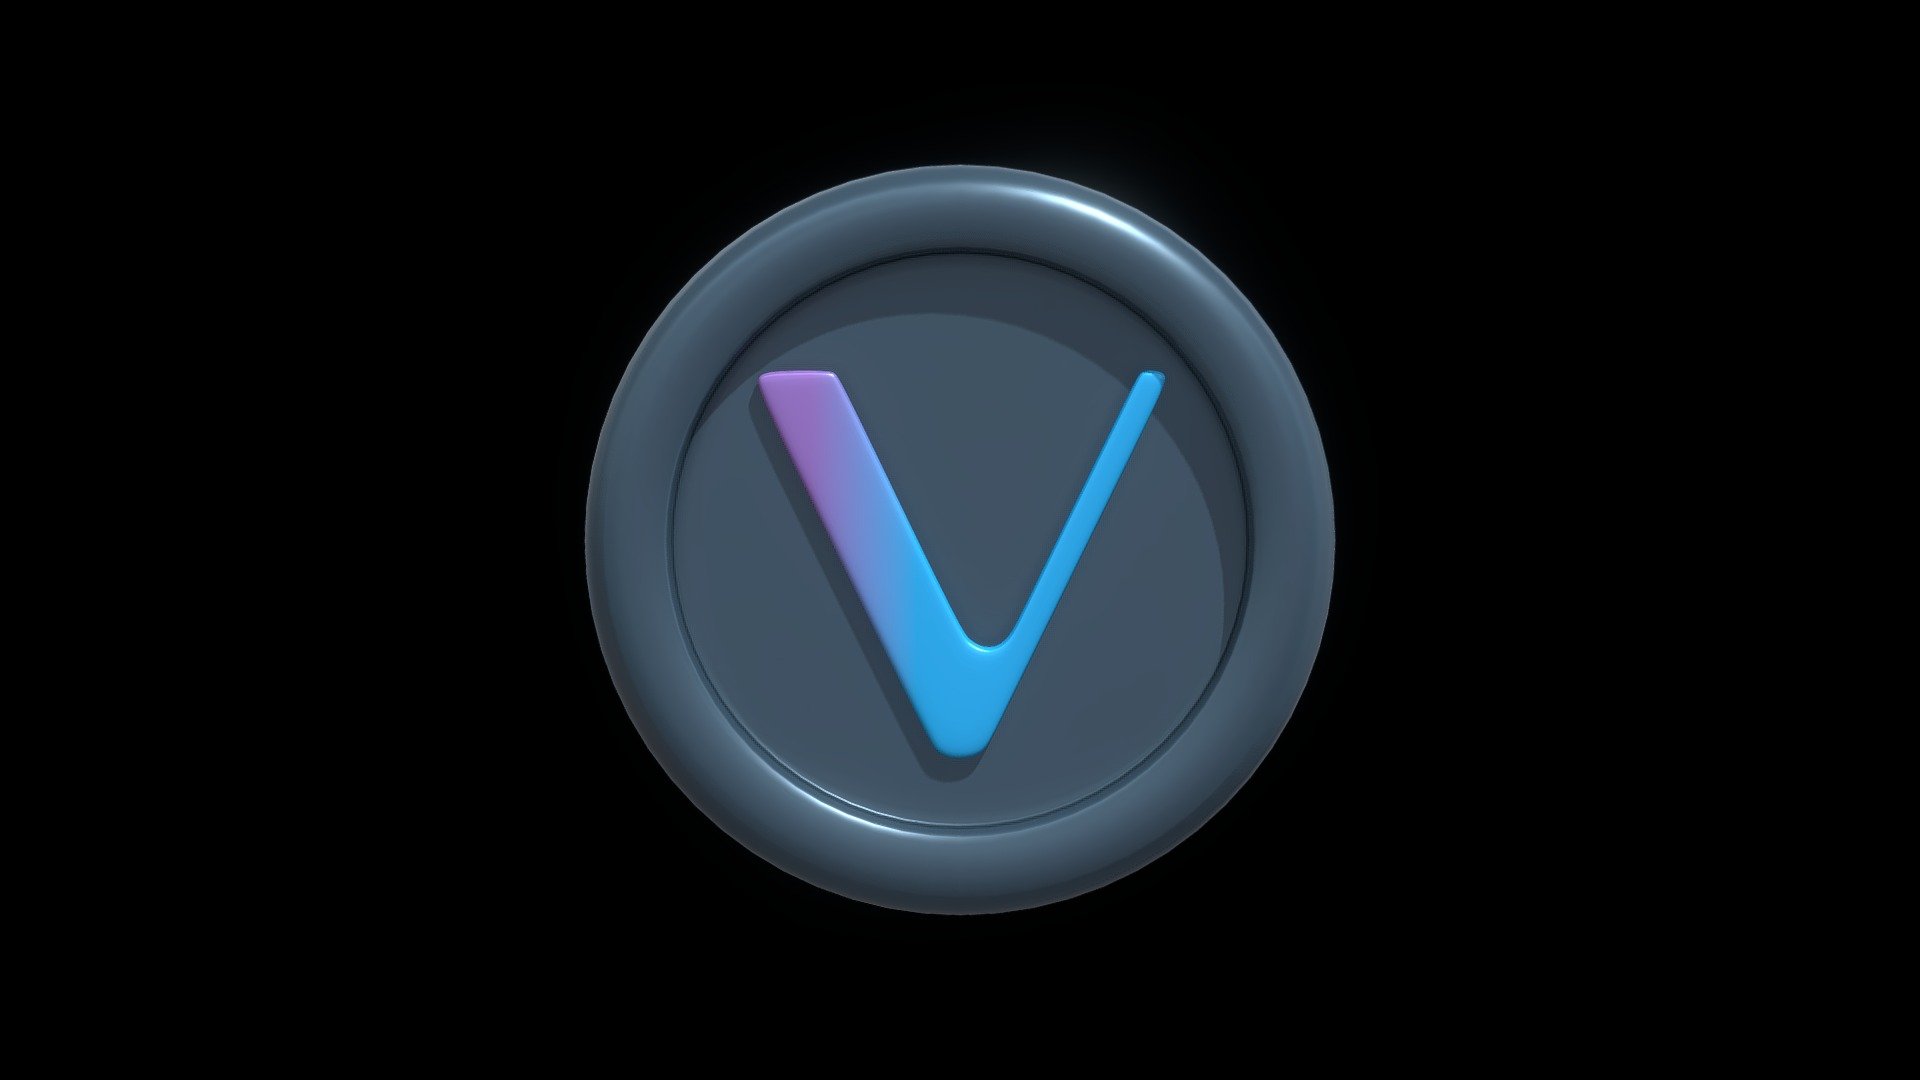 3D VeChain or VET Dark Teal Crypto Coin with cartoon style Made in Blender 3.3.1

This model does include a TEXTURE, DIFFUSE, METALLIC, AND ROUGHNESS MAP, but if you want to change the color you can change it in the blend file, just use the principled bsdf and play with the Roughness, Metallic, and Base Color parameter 3d model